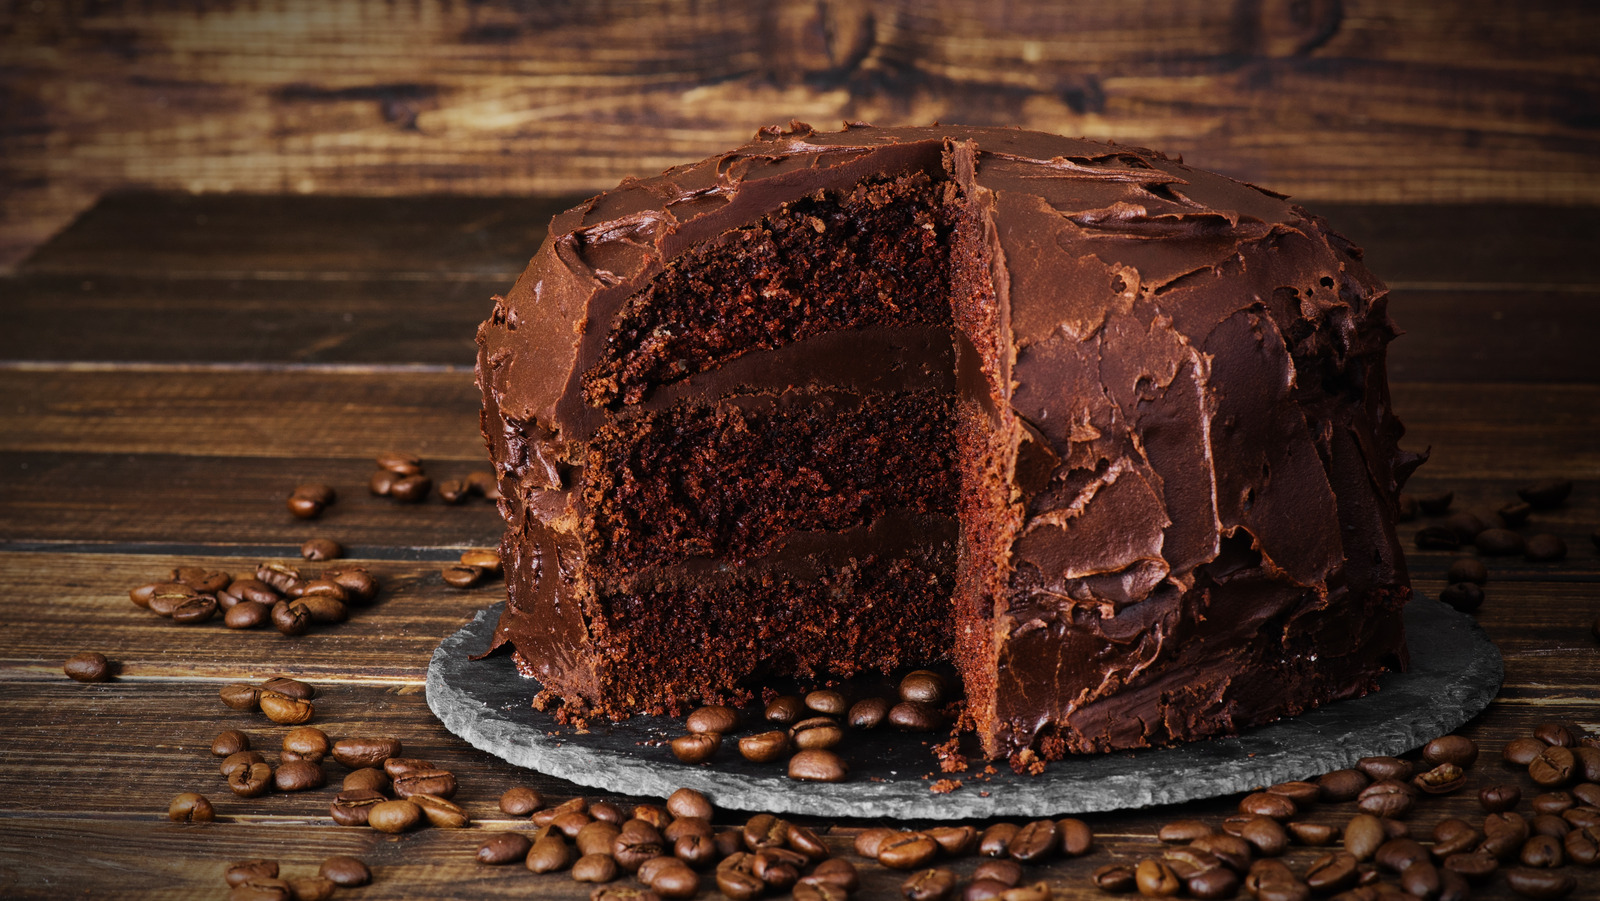 Do You Know How The Devil's Food Cake Got Its Name?